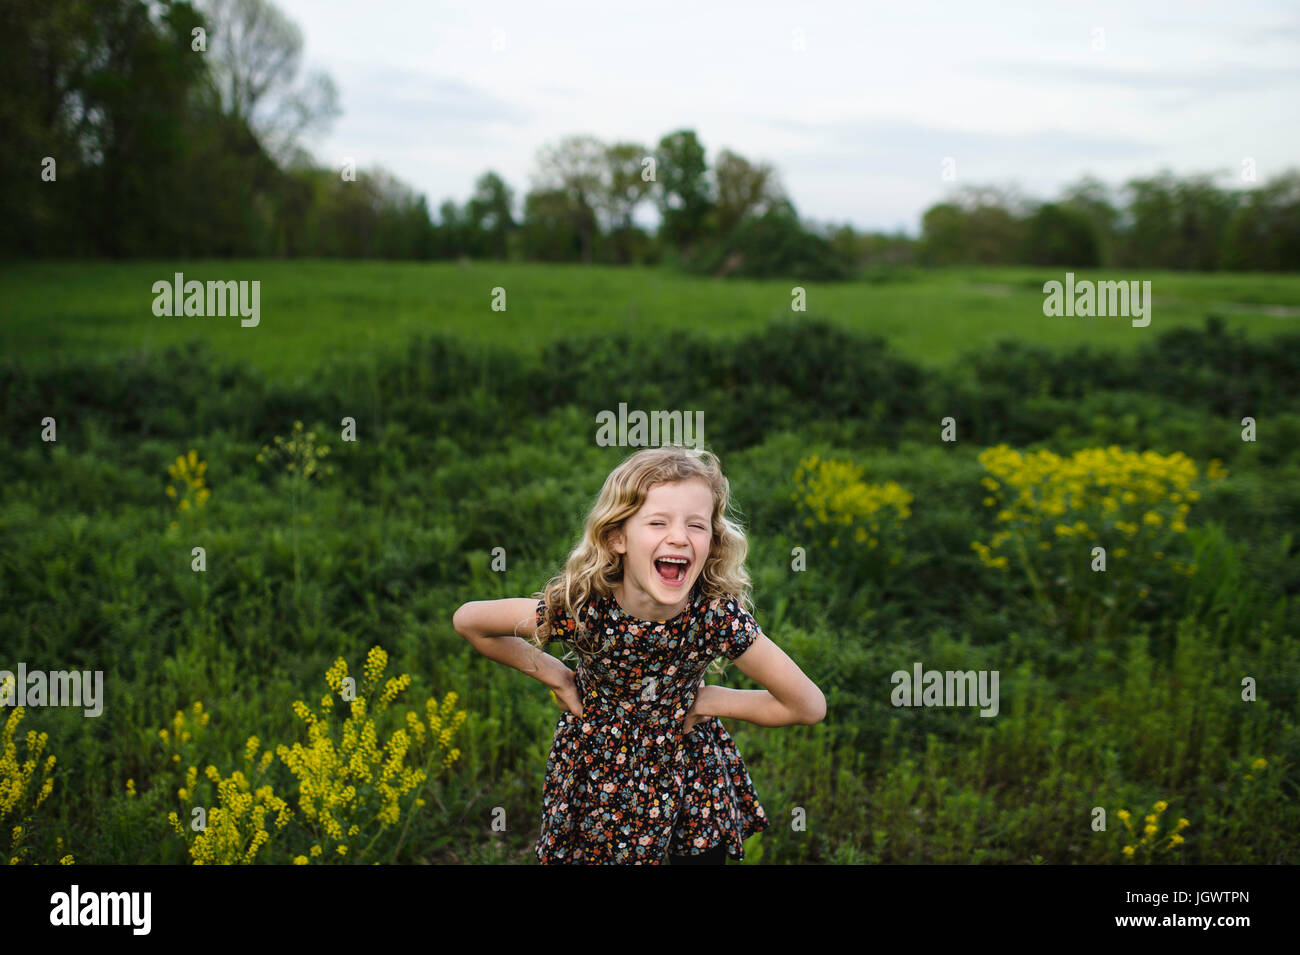 Portrait of girl with wavy blond hair laughing in field Stock Photo